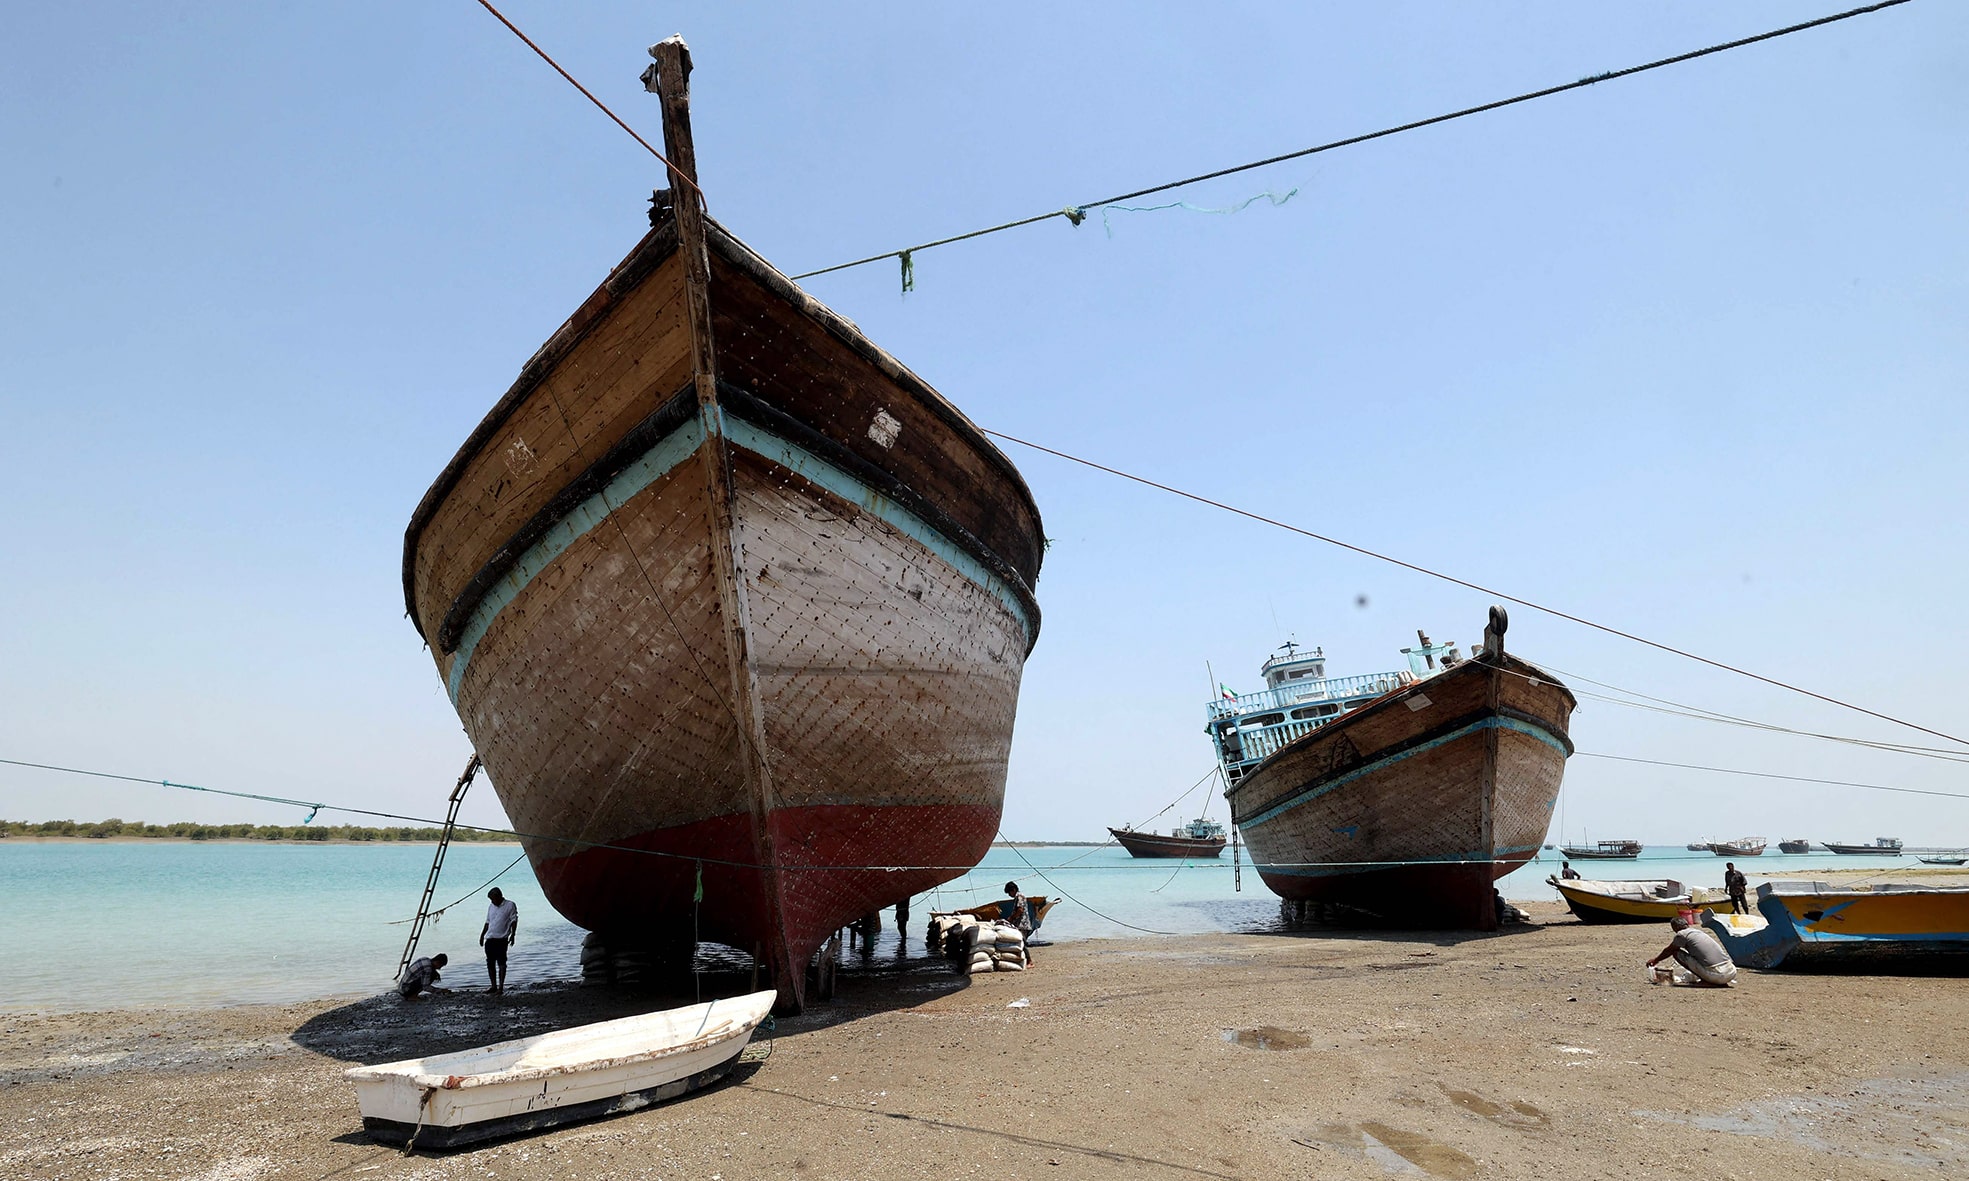 Traditional wooden ships (lenj) are pictured on Iran's touristic Qeshm island in the Gulf.—AFP photos